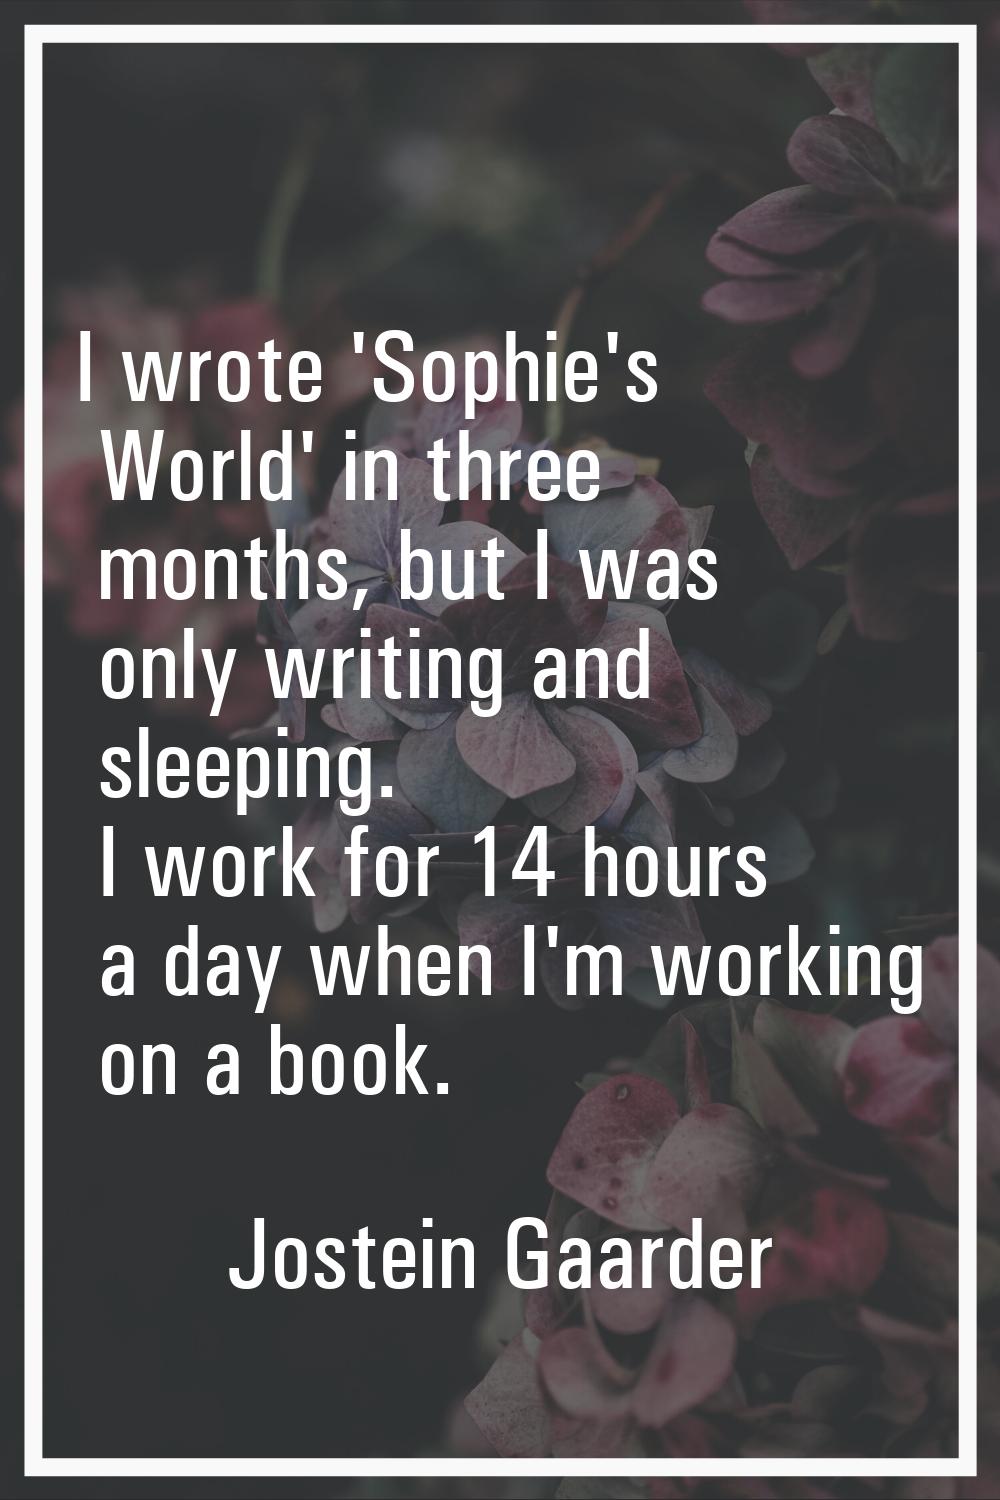 I wrote 'Sophie's World' in three months, but I was only writing and sleeping. I work for 14 hours 